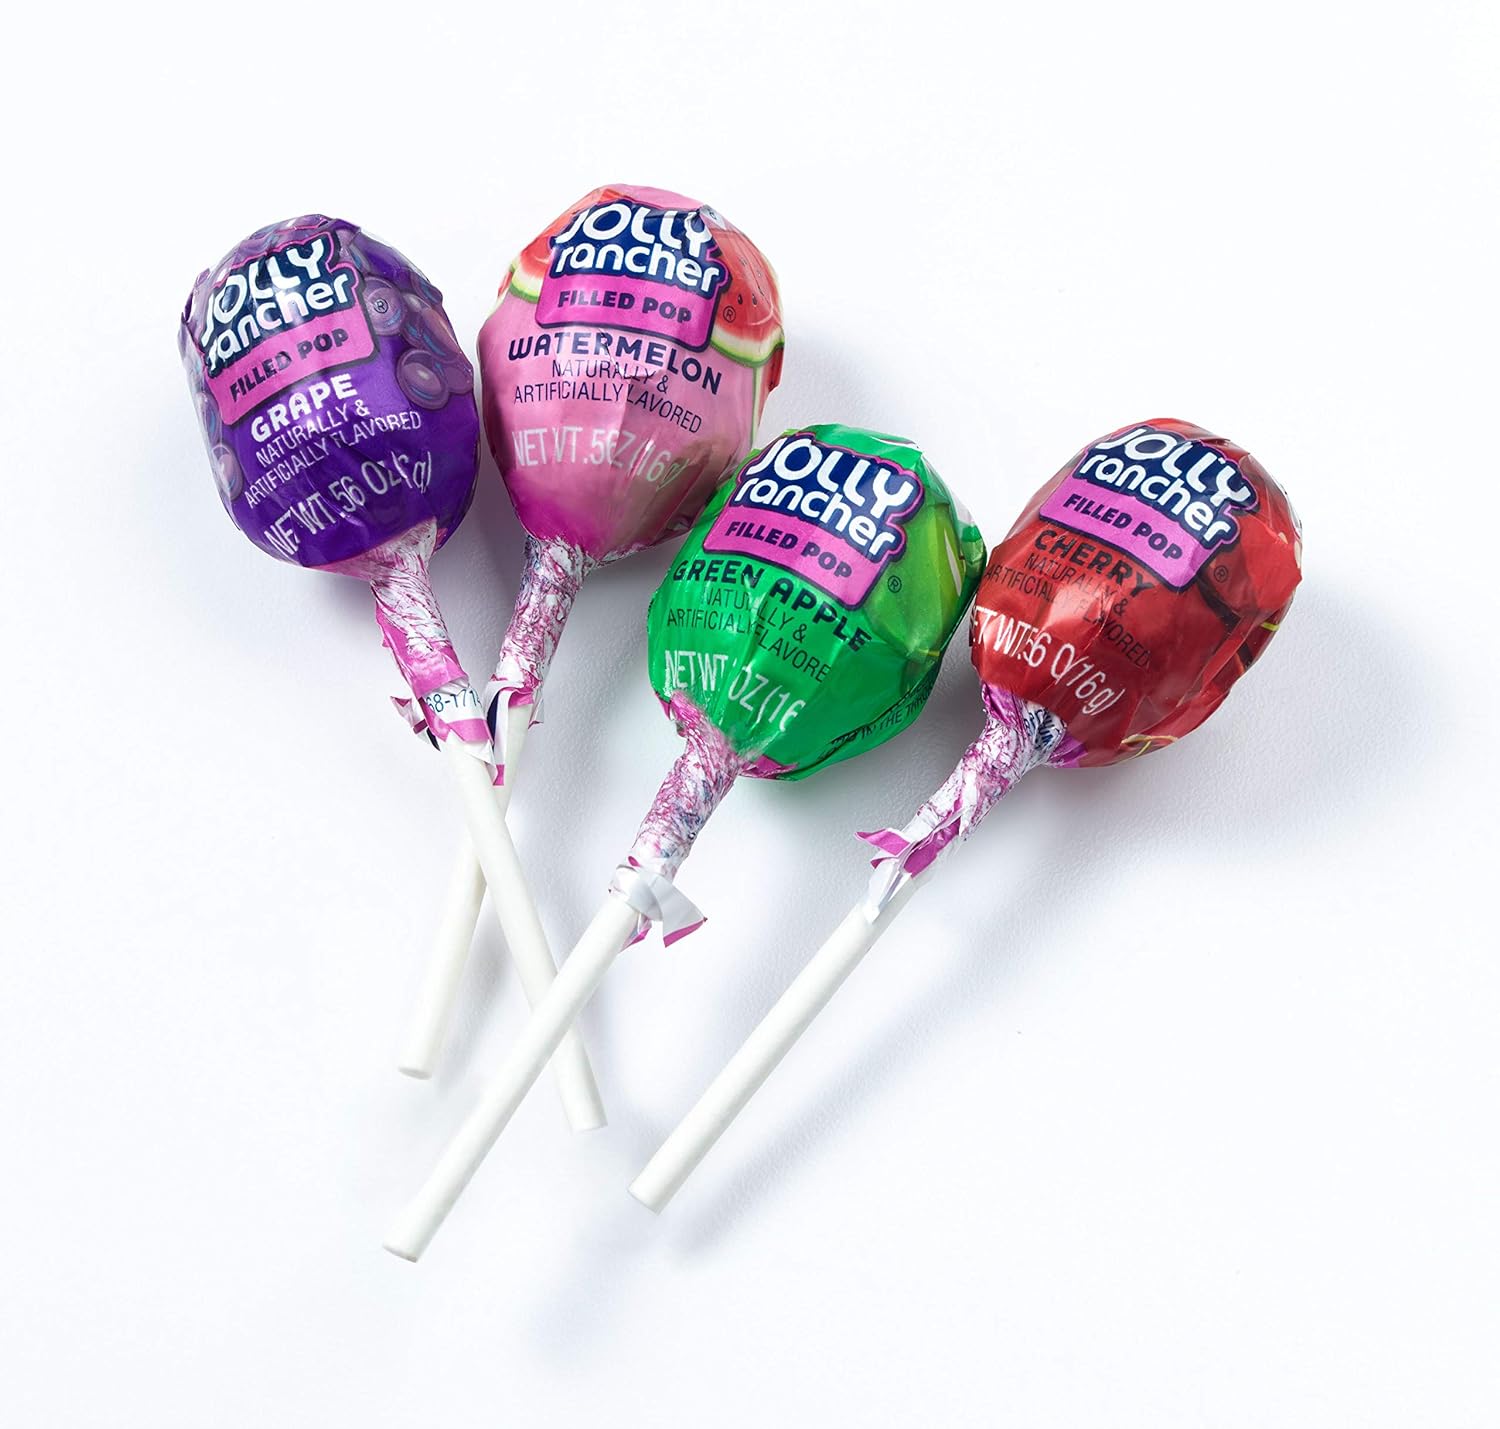  JOLLY RANCHER Lollipops, Hard Candy and Stix Assorted Fruit Flavored Candy, Easter, 46 oz Bag